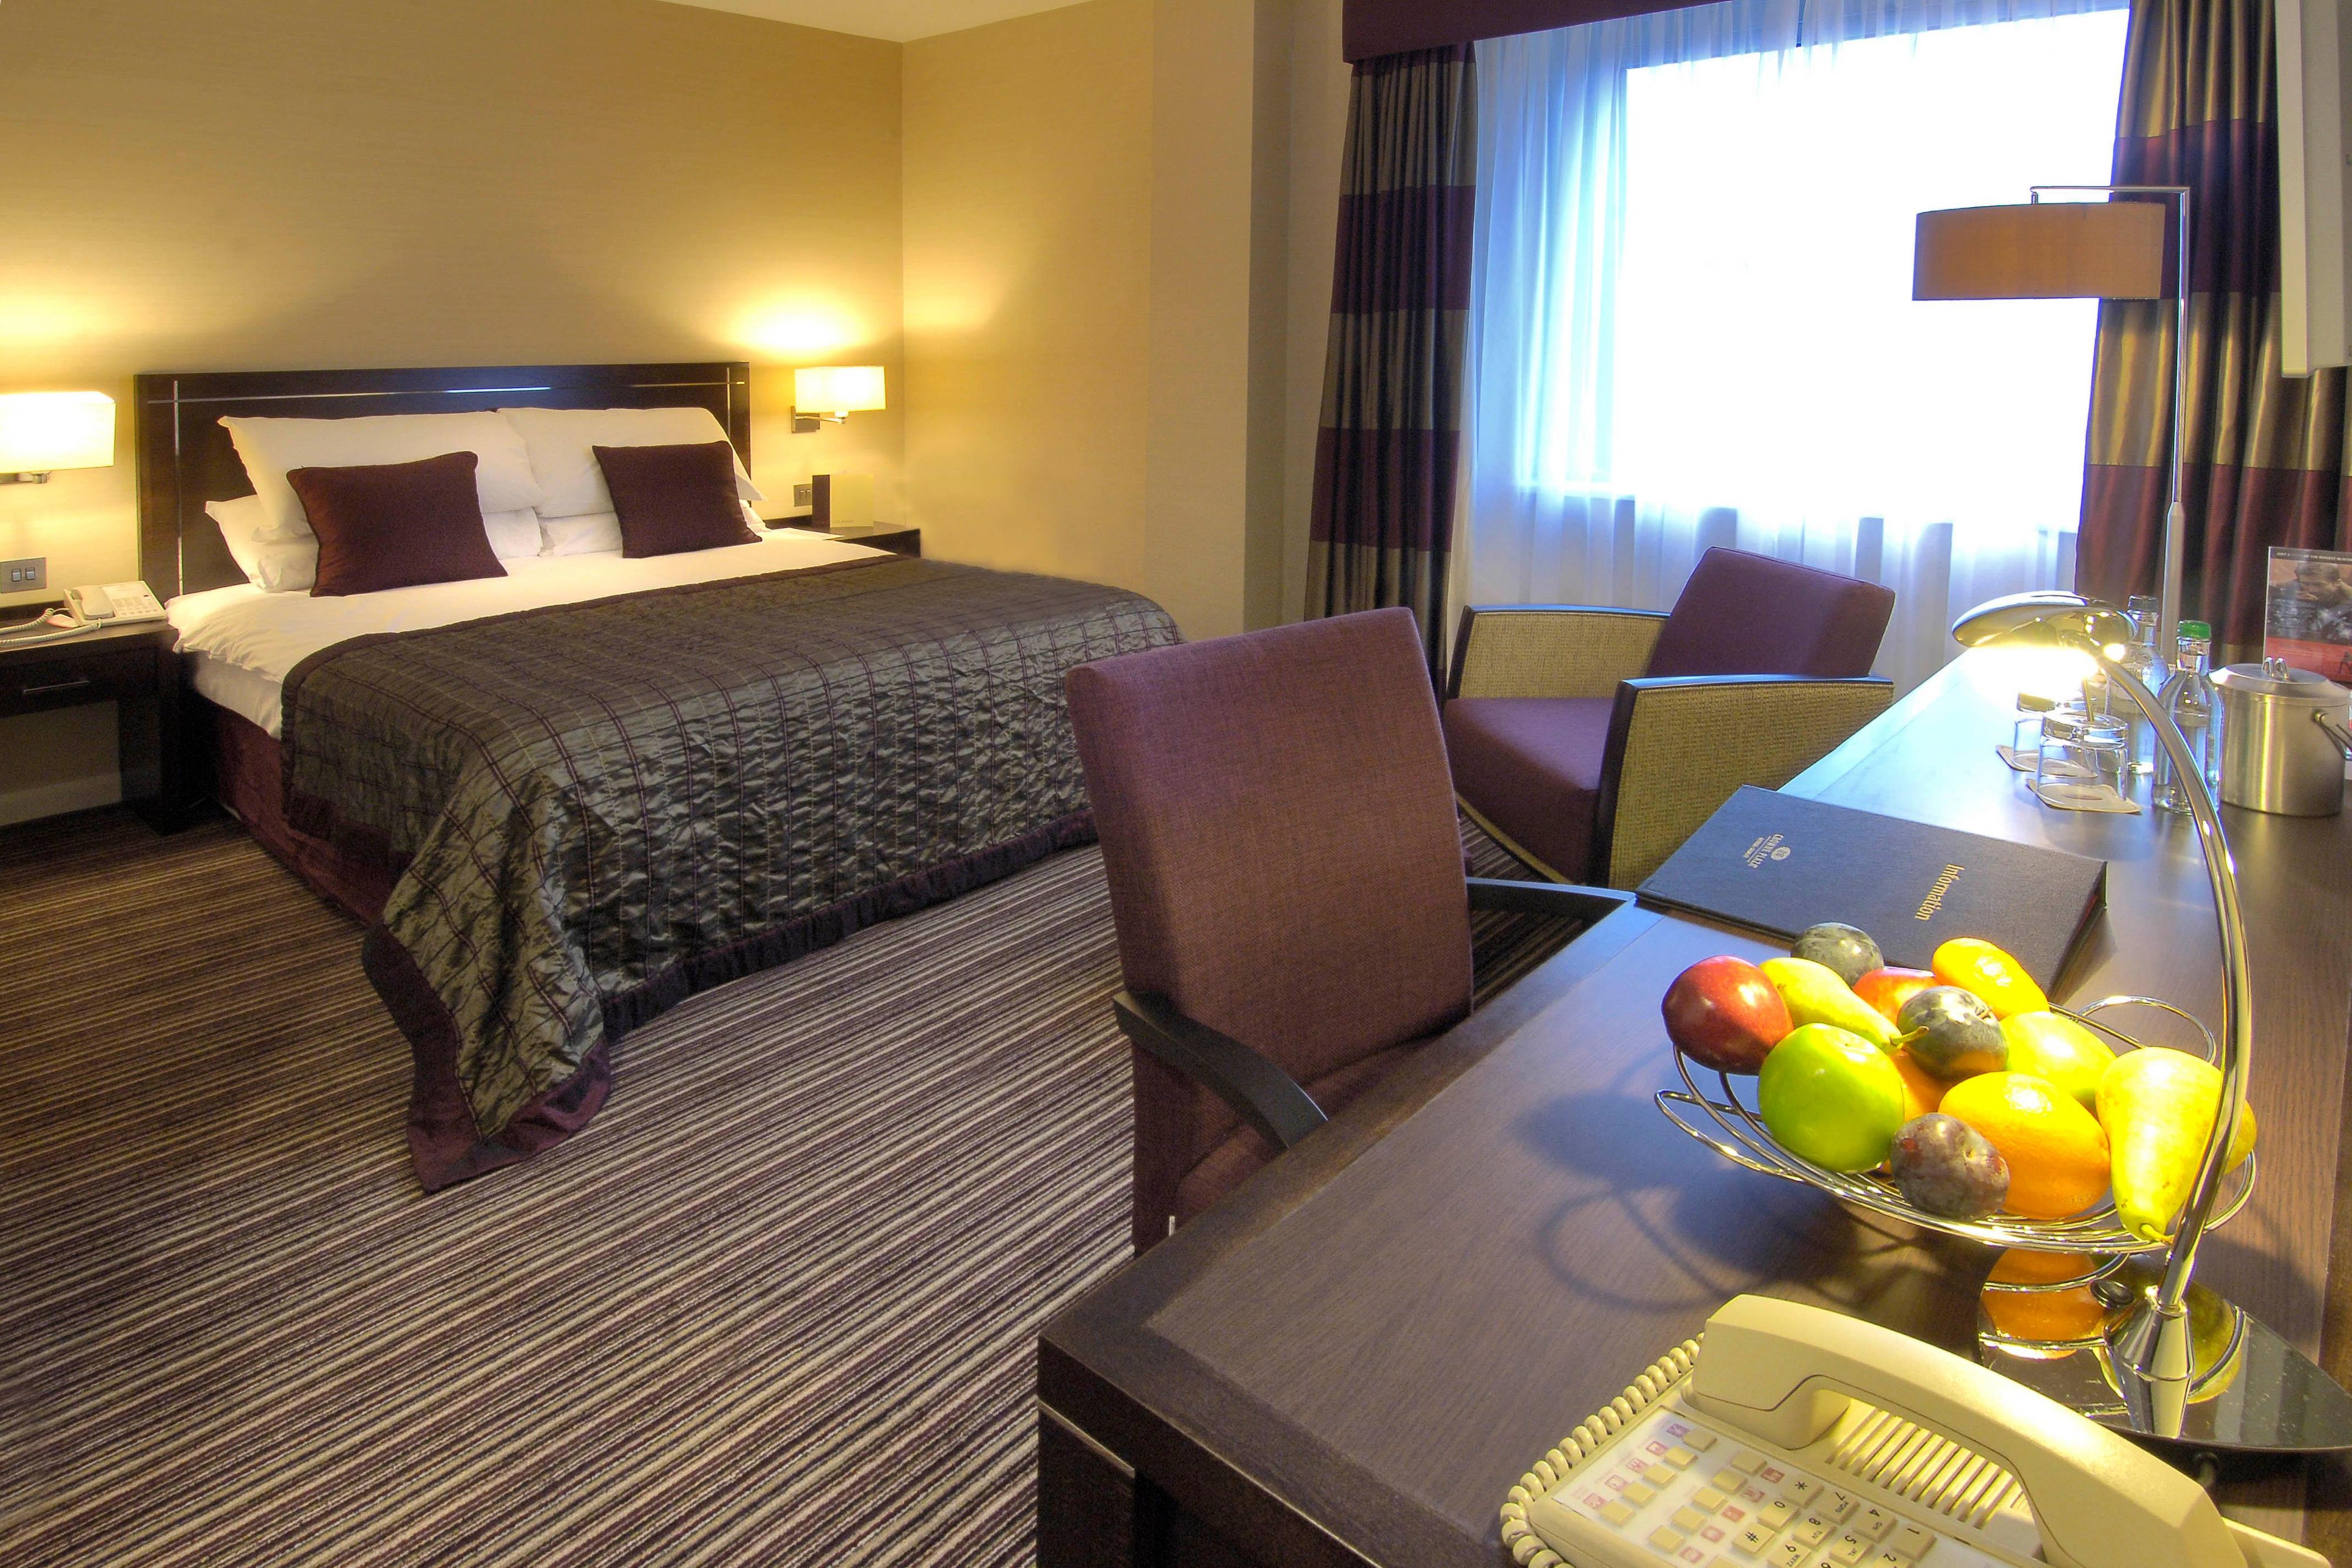 Upgrade to a Superior, Queen bed room for a little more luxury